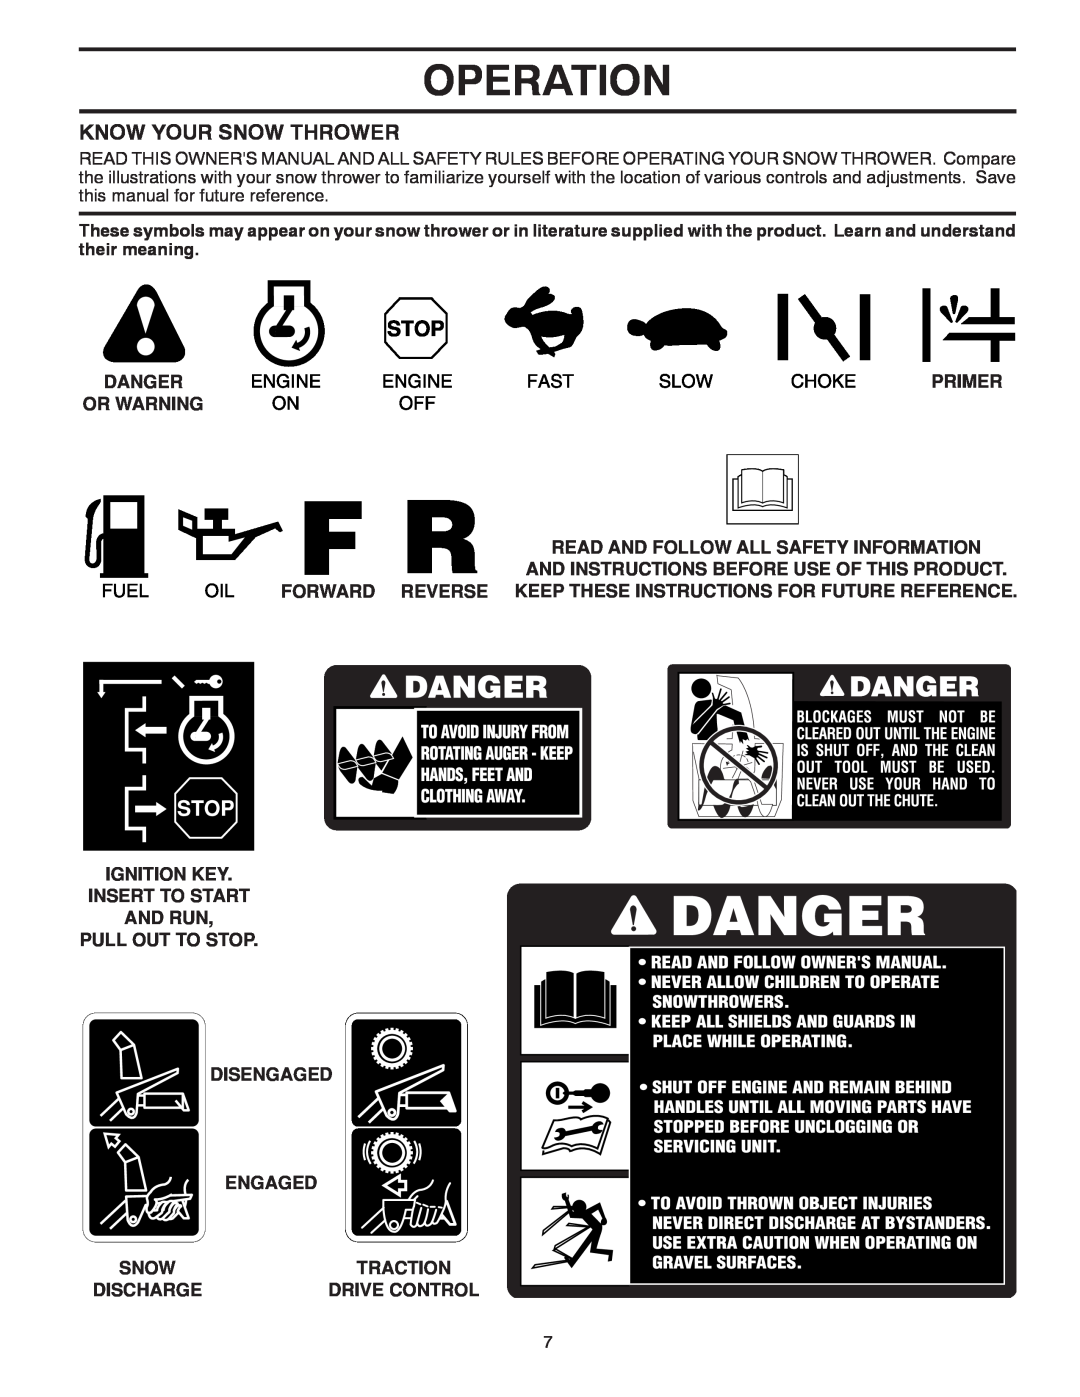 Poulan PR5524ESLCT, 424704 owner manual Operation, Know Your Snow Thrower 